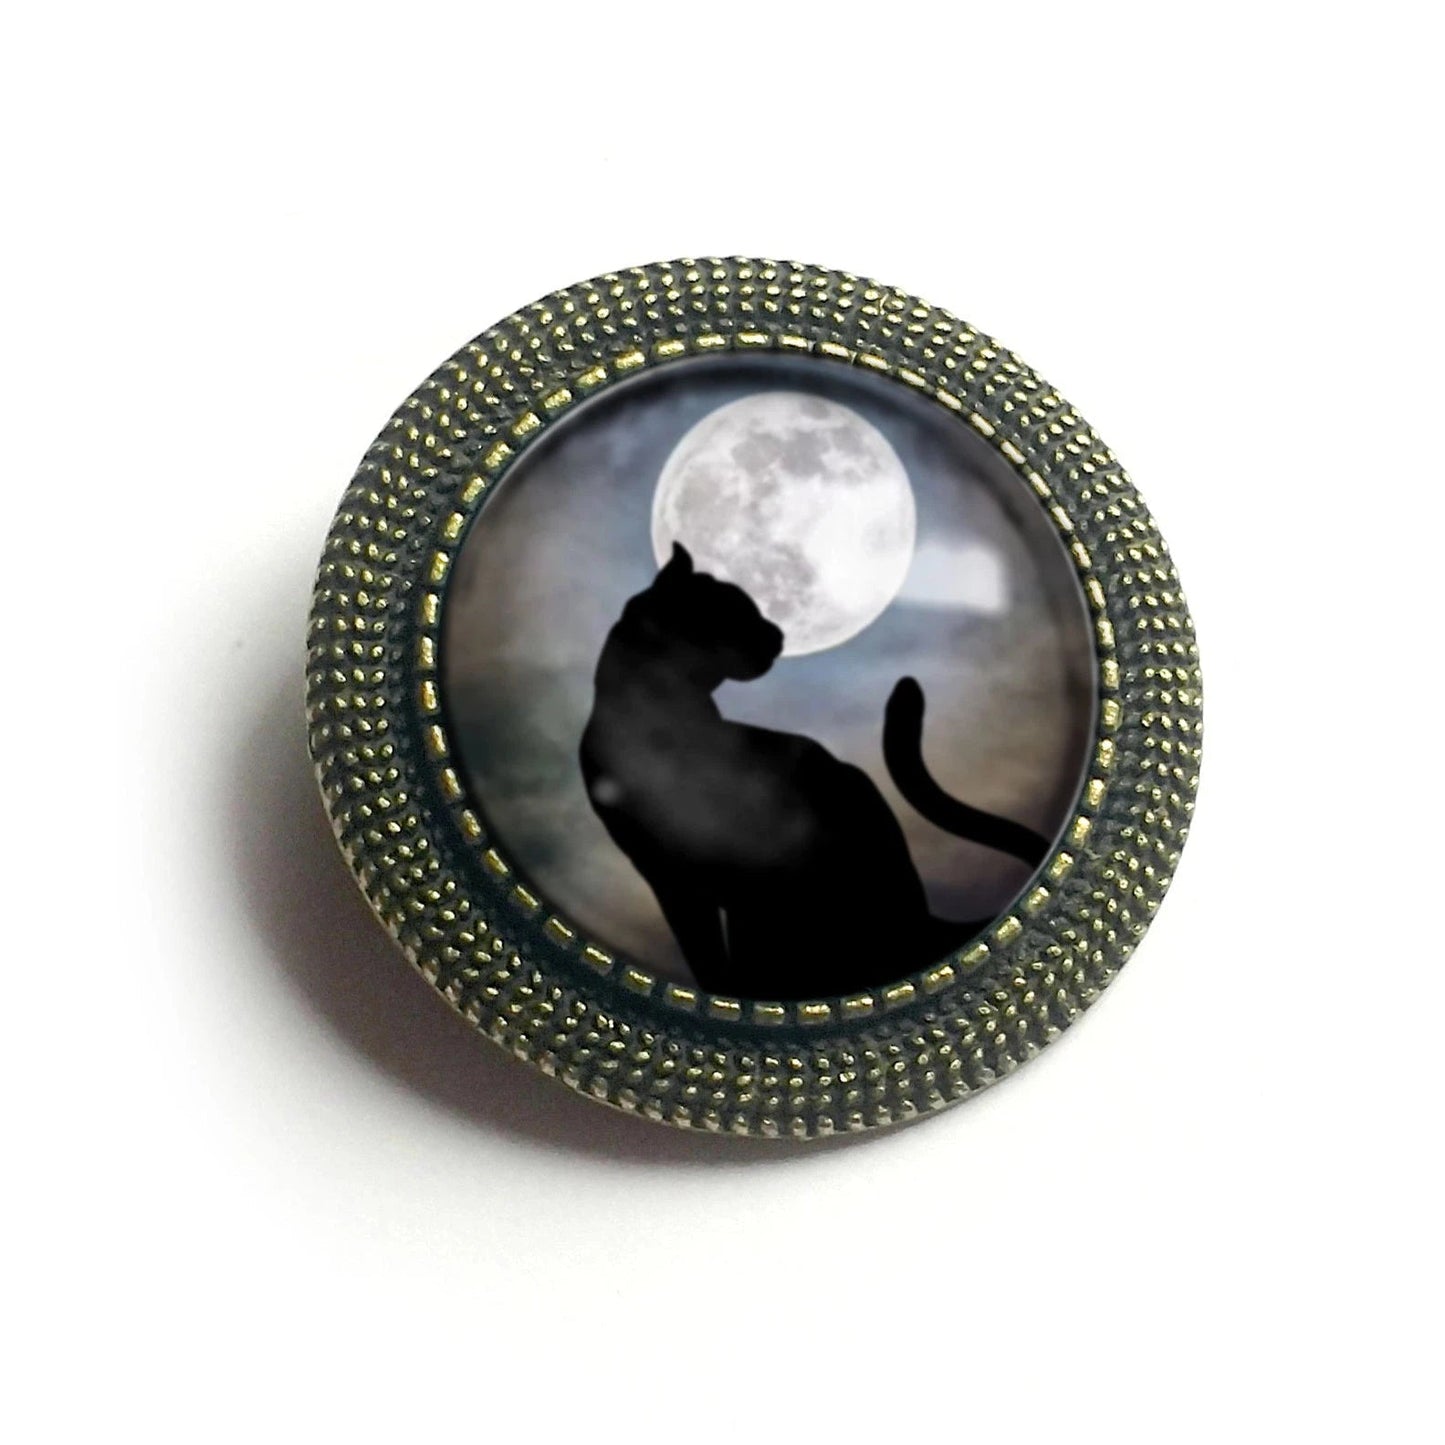 Black Cat and Full Moon Brooch | Goth, Halloween | Handmade in the US